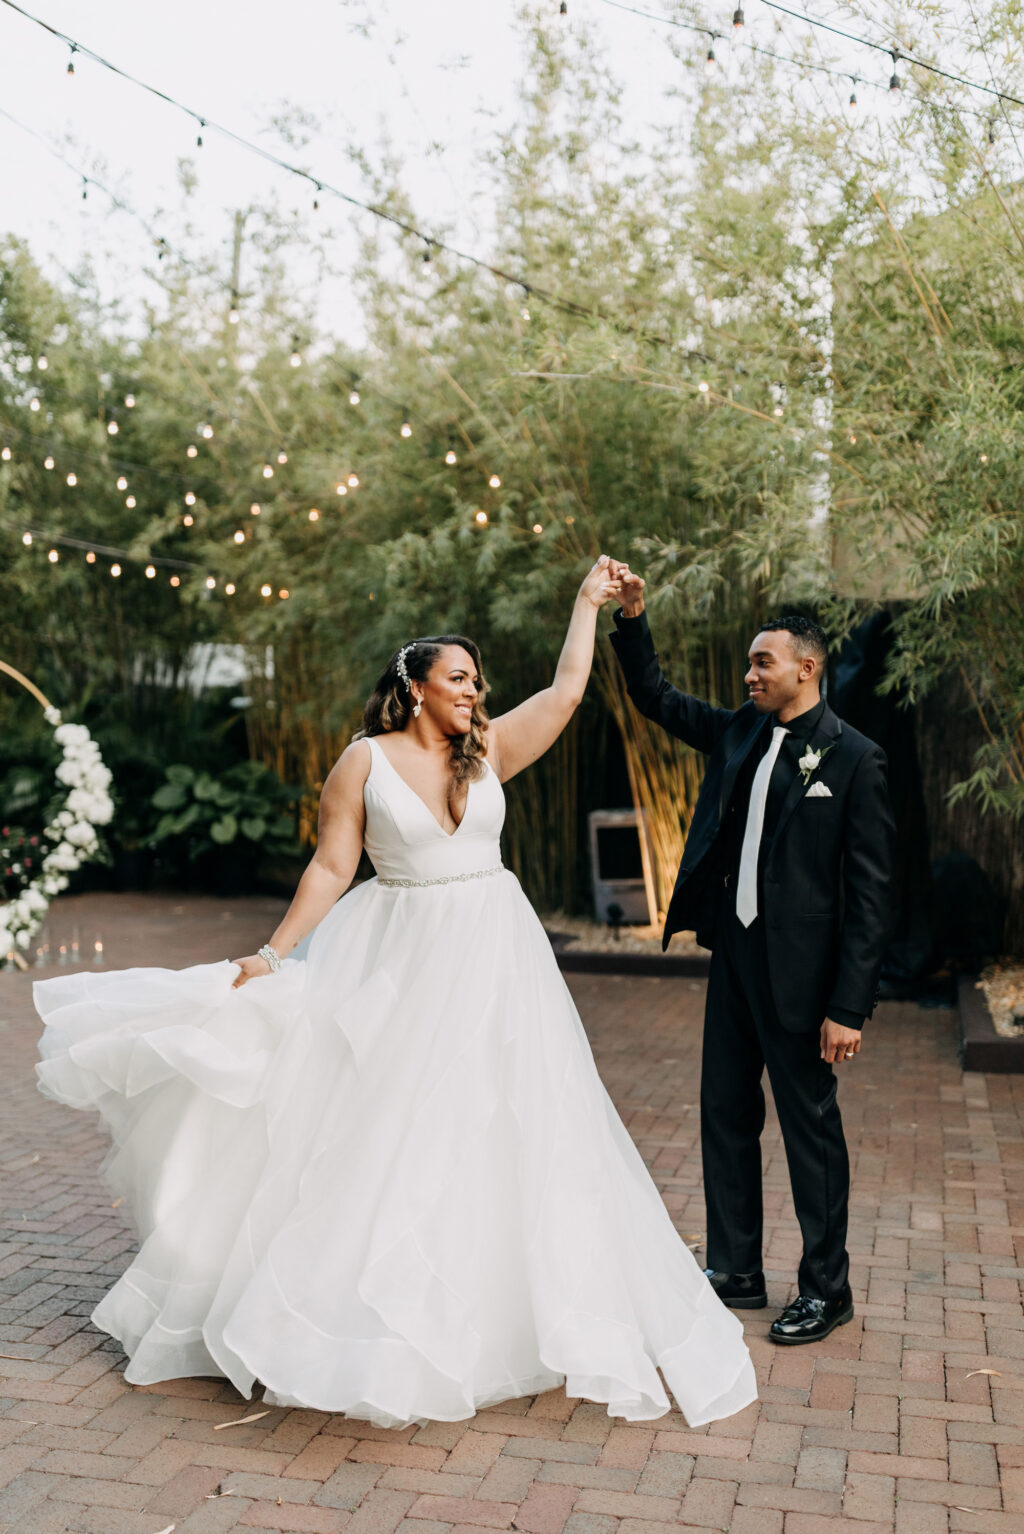 Romantic Classic Bride and Groom Dancing in Bamboo Courtyard of Unique Downtown Tampa Wedding Venue NOVA 535 | Wedding Photographer Amber McWhorter Photograpy